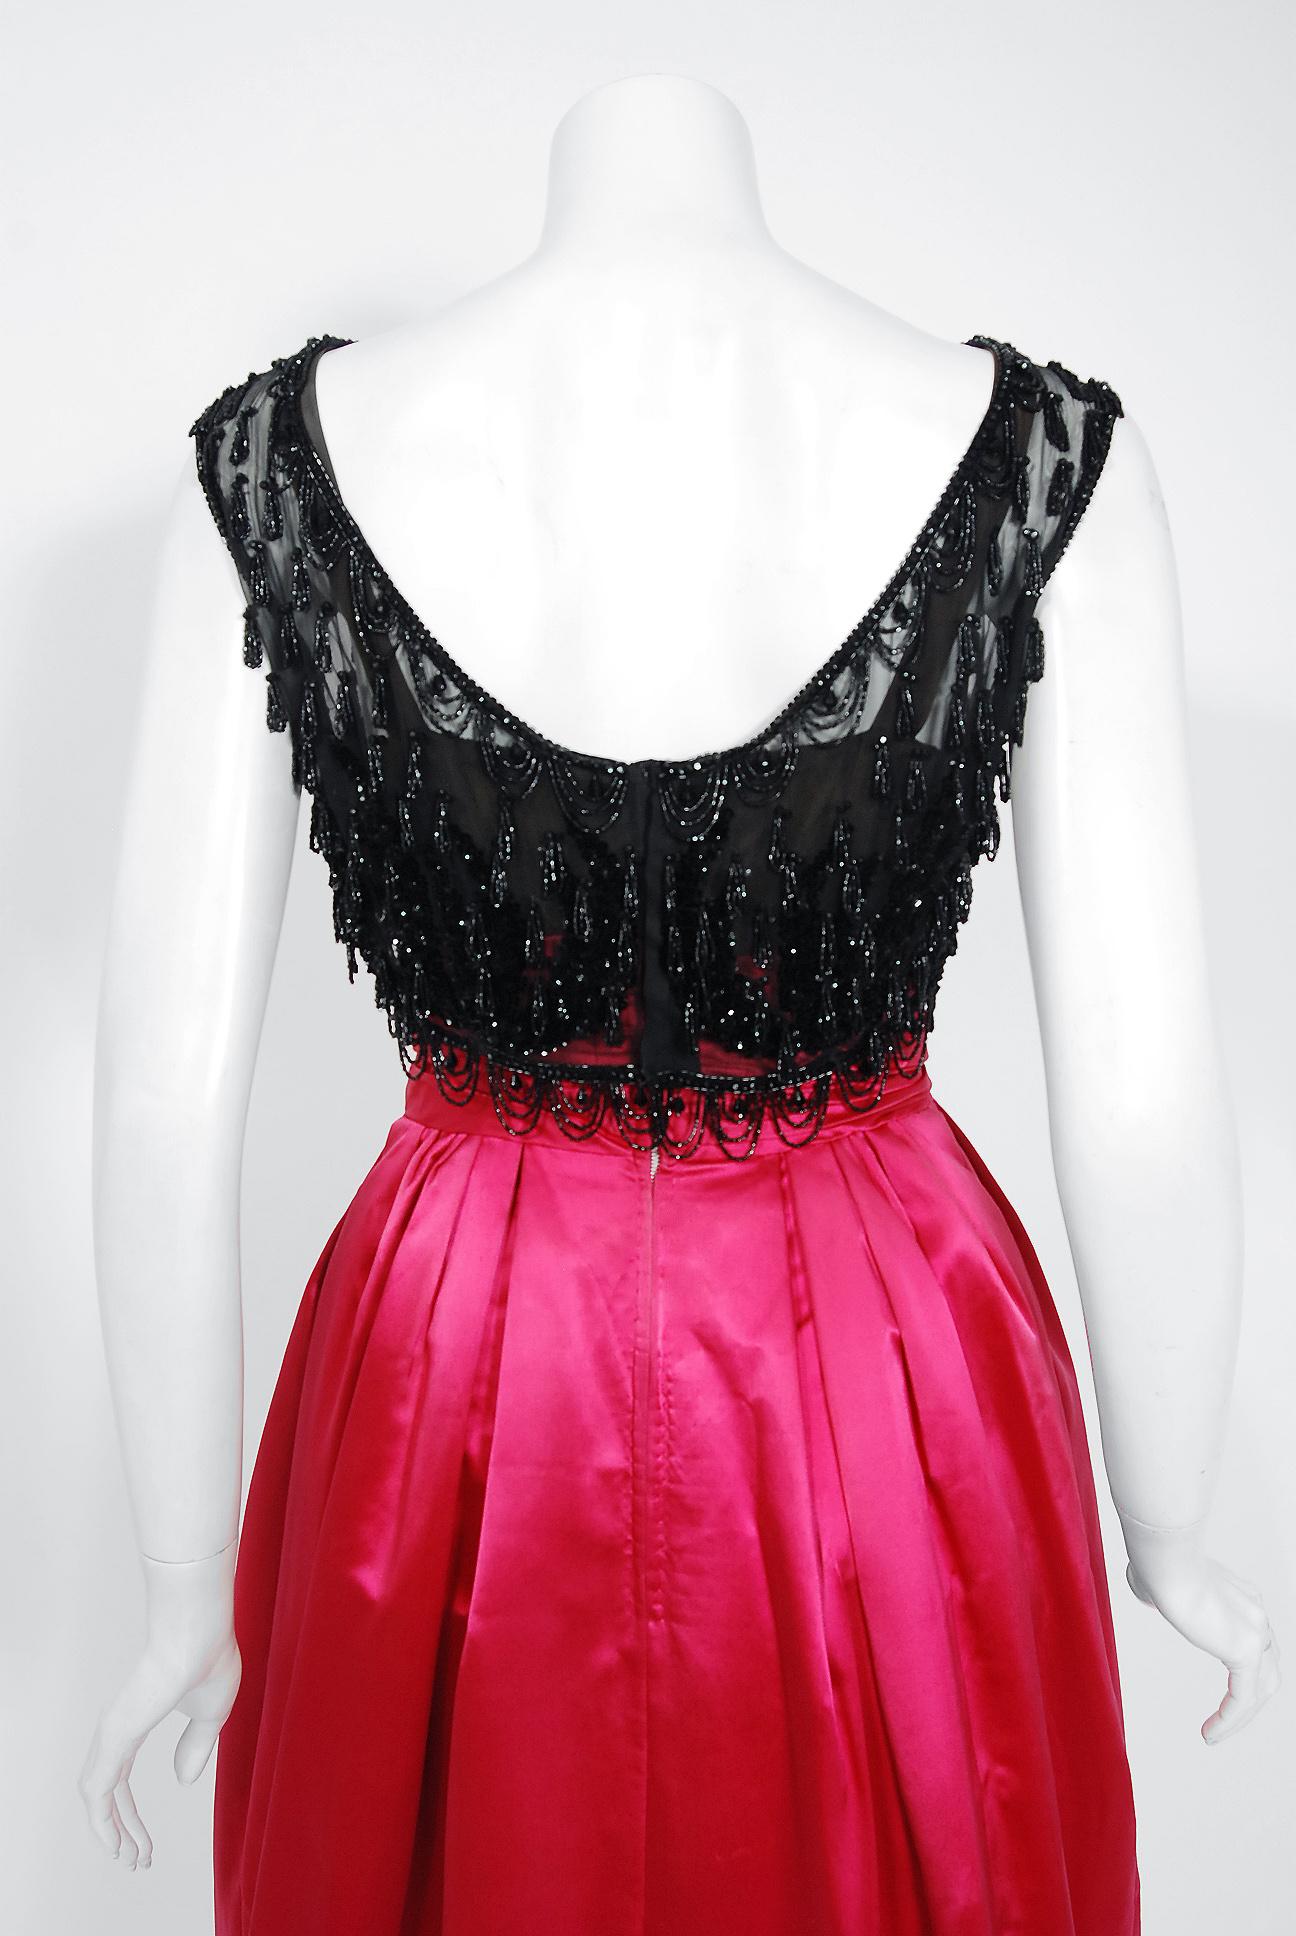 Vintage 1950s Fuchsia Pink Satin Beaded Illusion Couture Cocktail Dress w/ Shawl For Sale 2